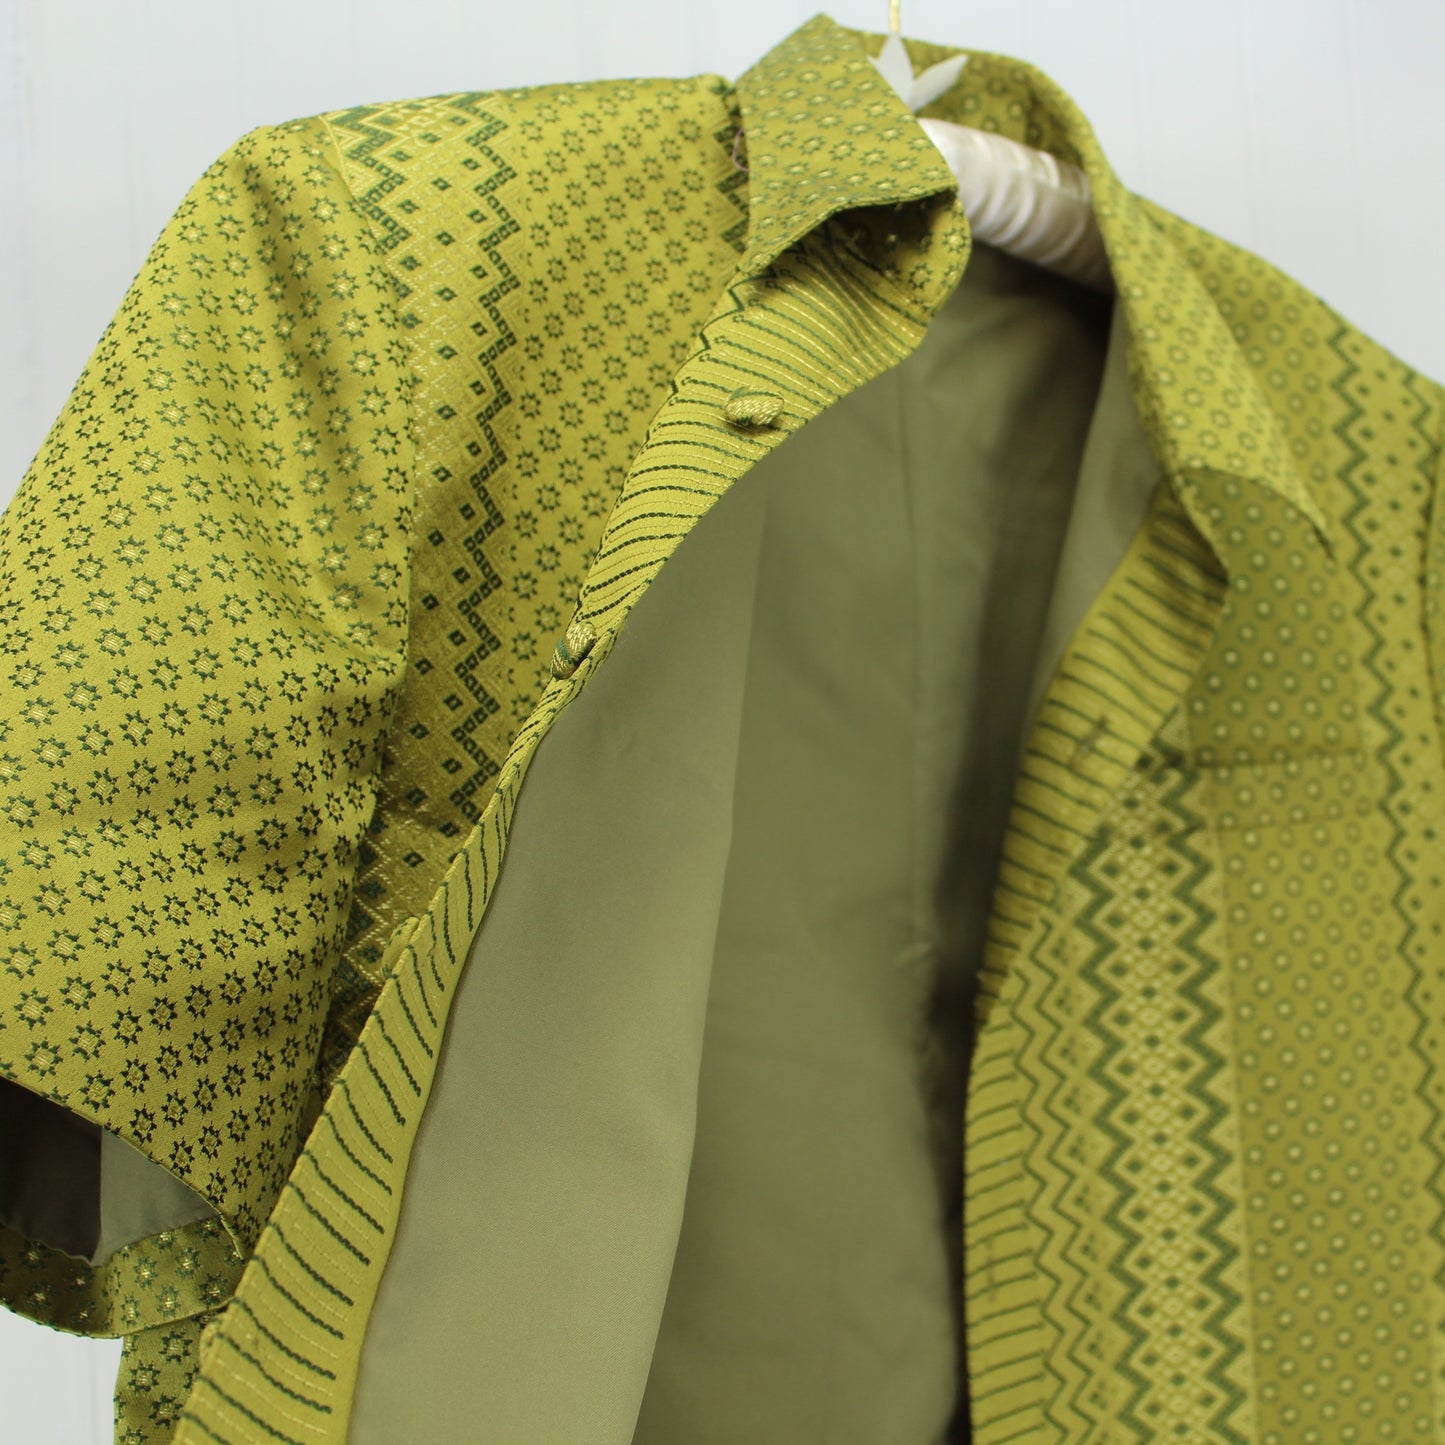 Mens Wedding Formal Jacket 1970s Green Brocade Hand Tailored Asian Style Half Sleeve lining coordinated solid color